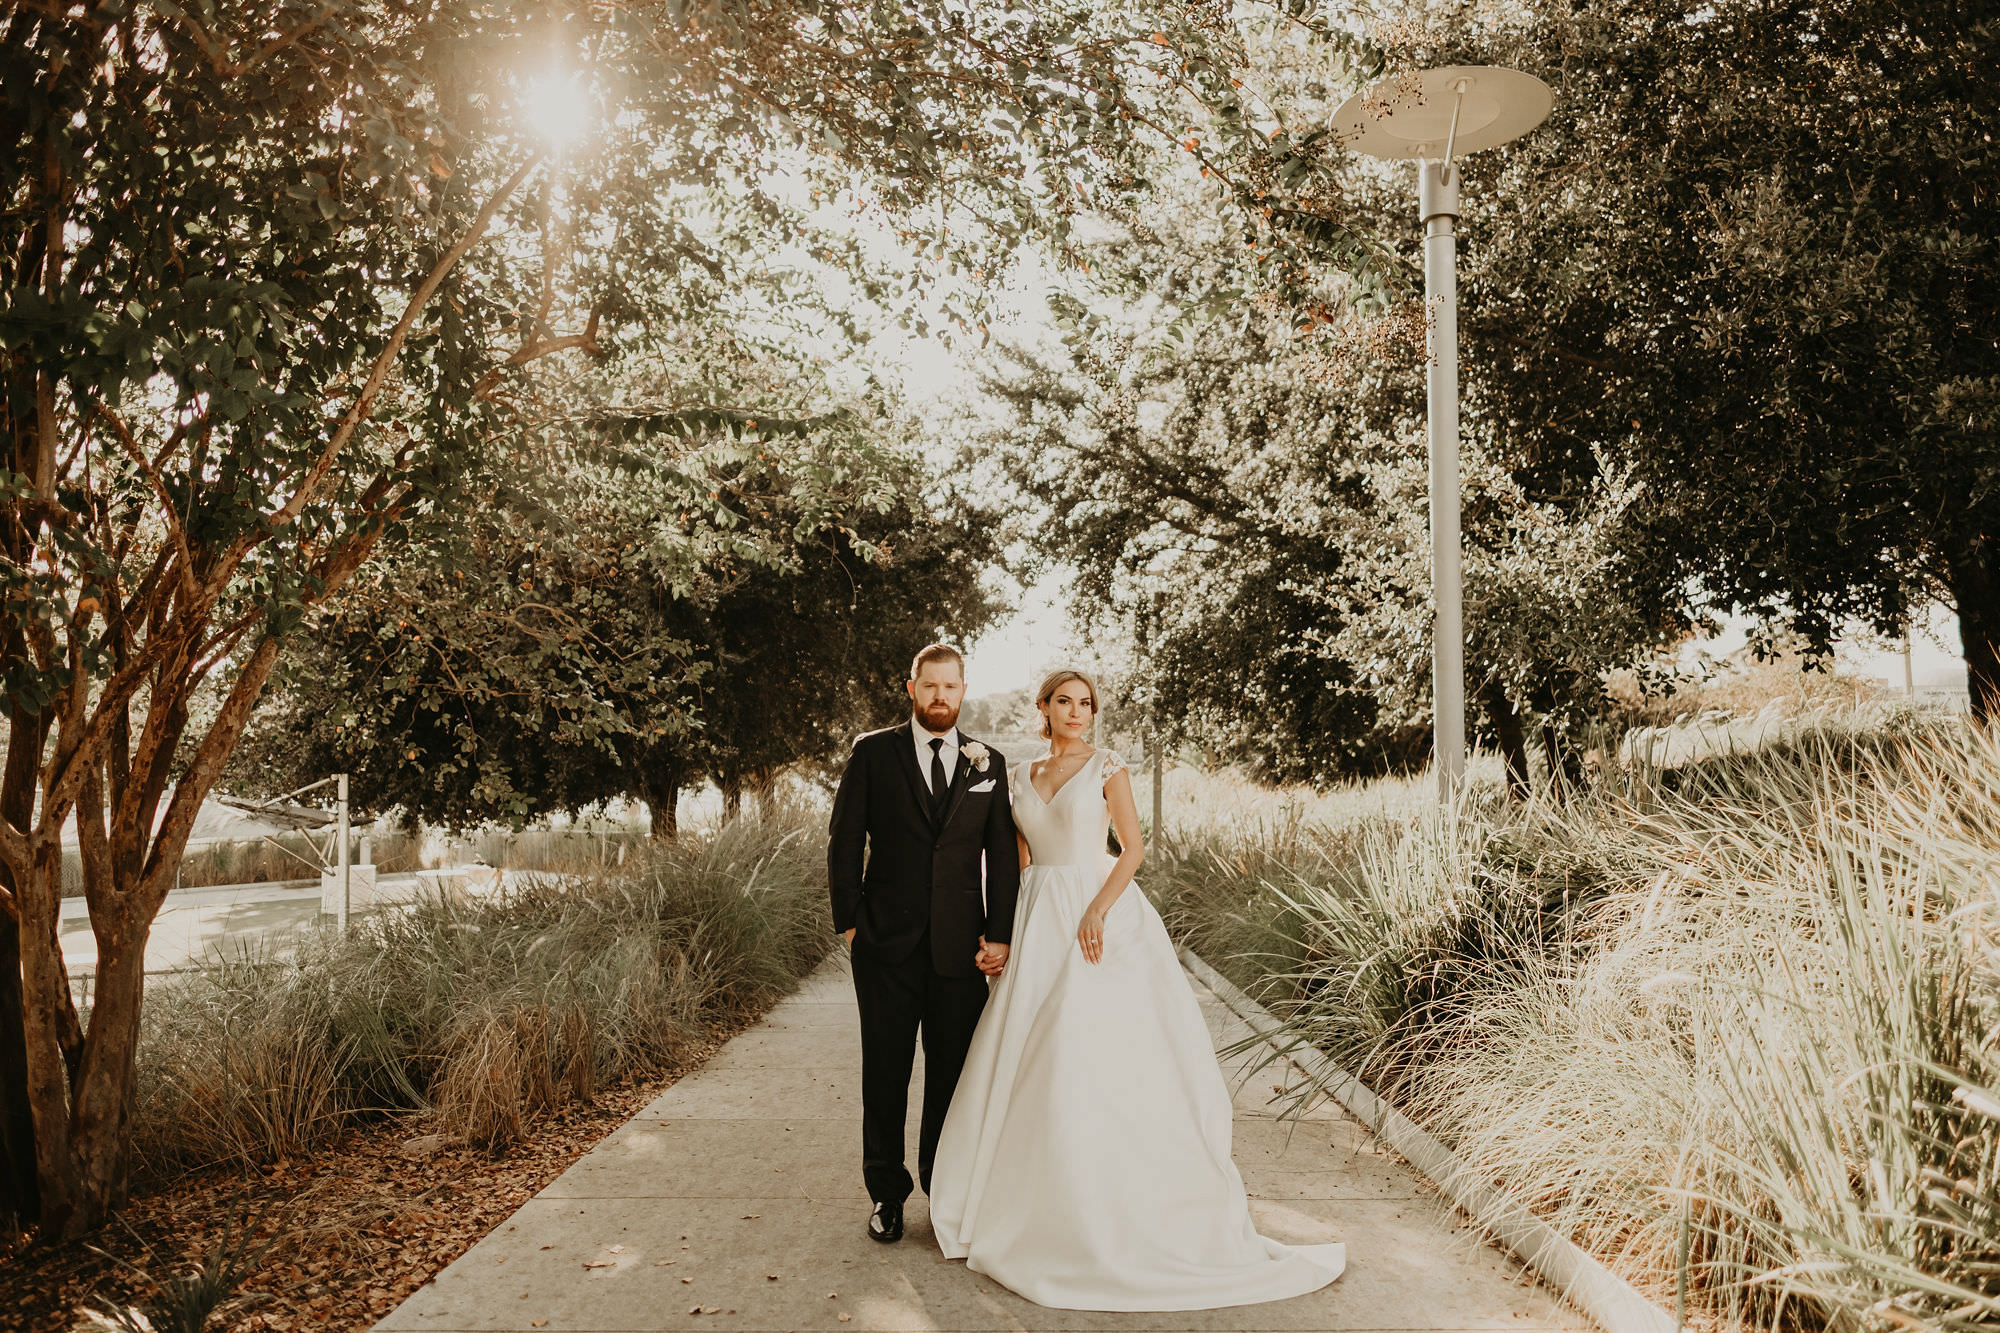 Outdoor Bride and Groom Portrait with Tree Lined Sidewalk | V Neck Low Back Mikado Satin and Lace Ballgown Wedding Dress by Anomalie | Groom wearing Classic Black Suit Tux